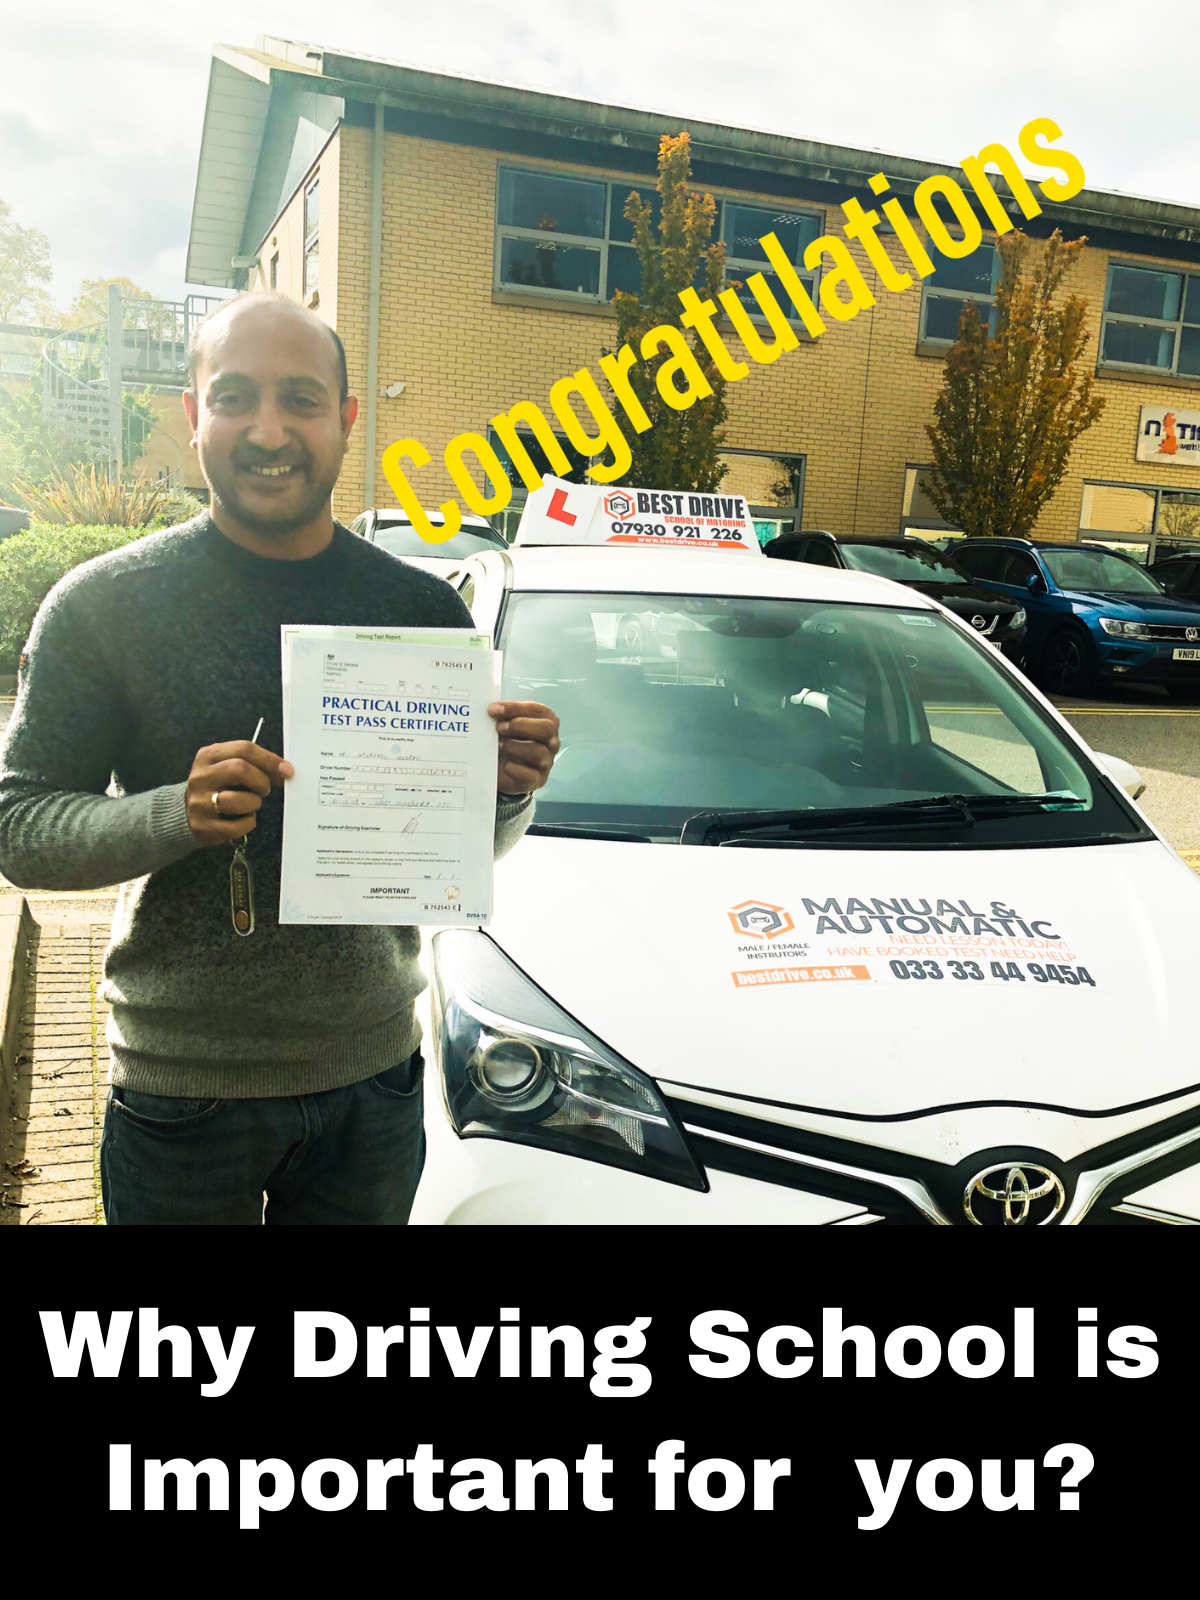 Why Driving School is Important for you?